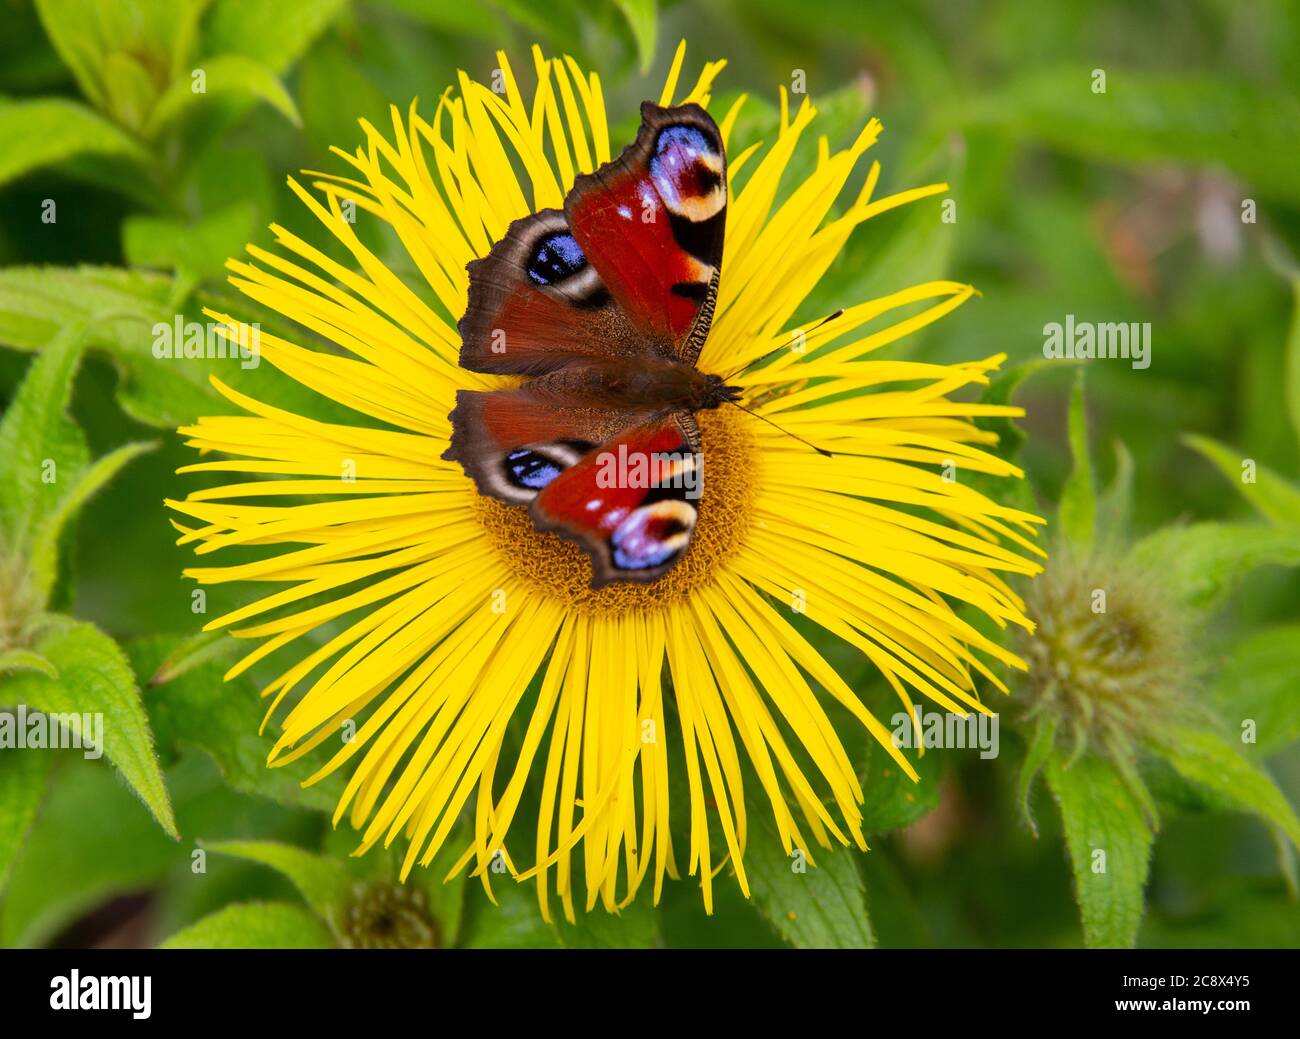 A Peacock butterfly, Aglais io, the European Peacock, feeds from an Inula Hookeri flowering a garden in Devon, United Kingdom. Stock Photo